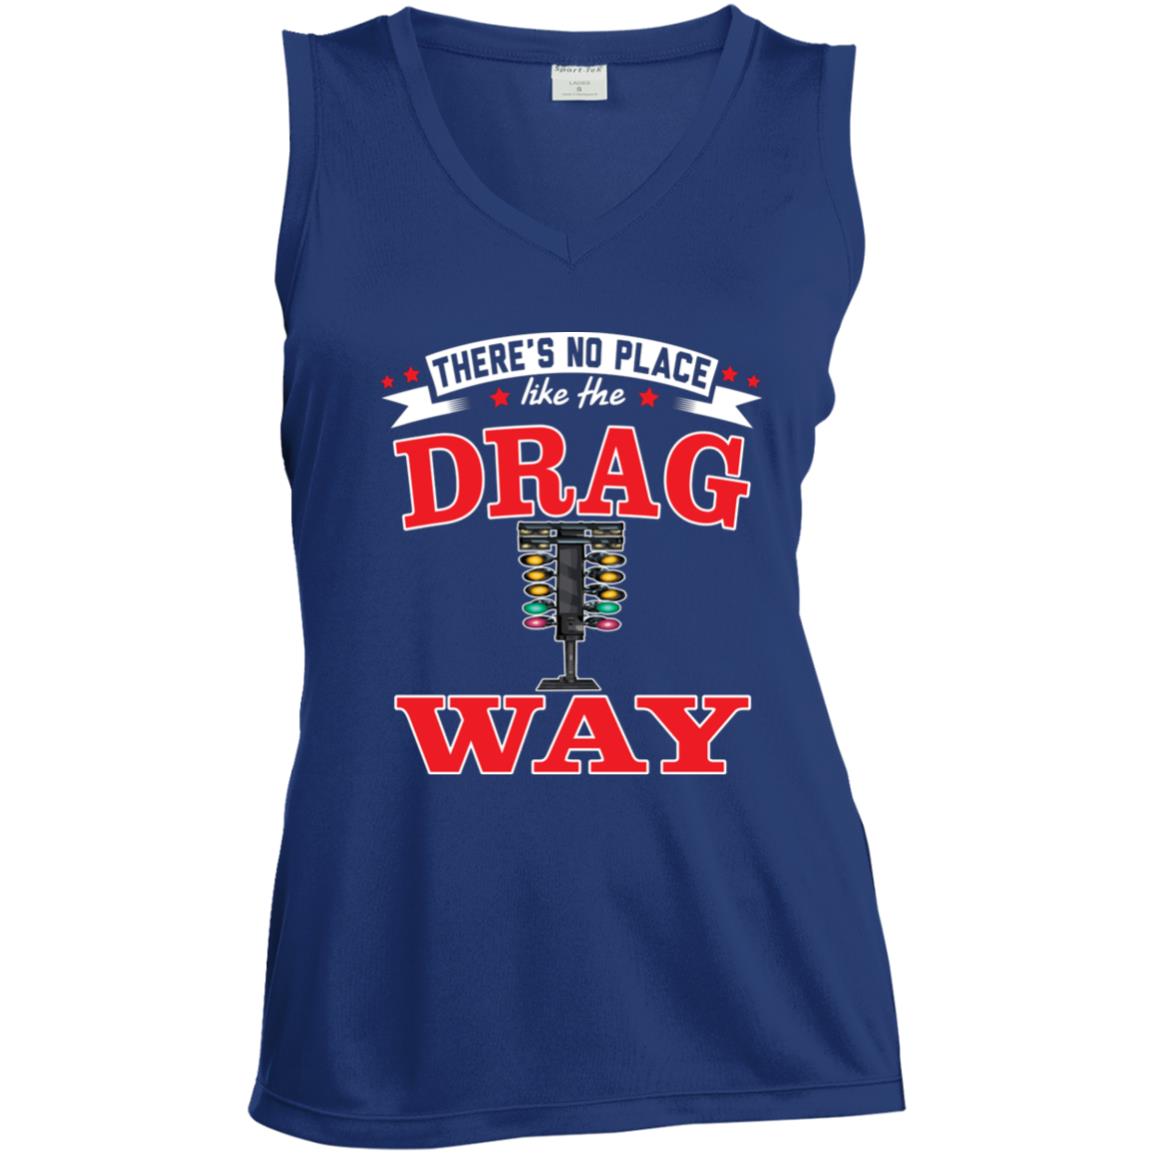 There's No Place Like The Dragway Women's Sleeveless V-Neck Performance Tee